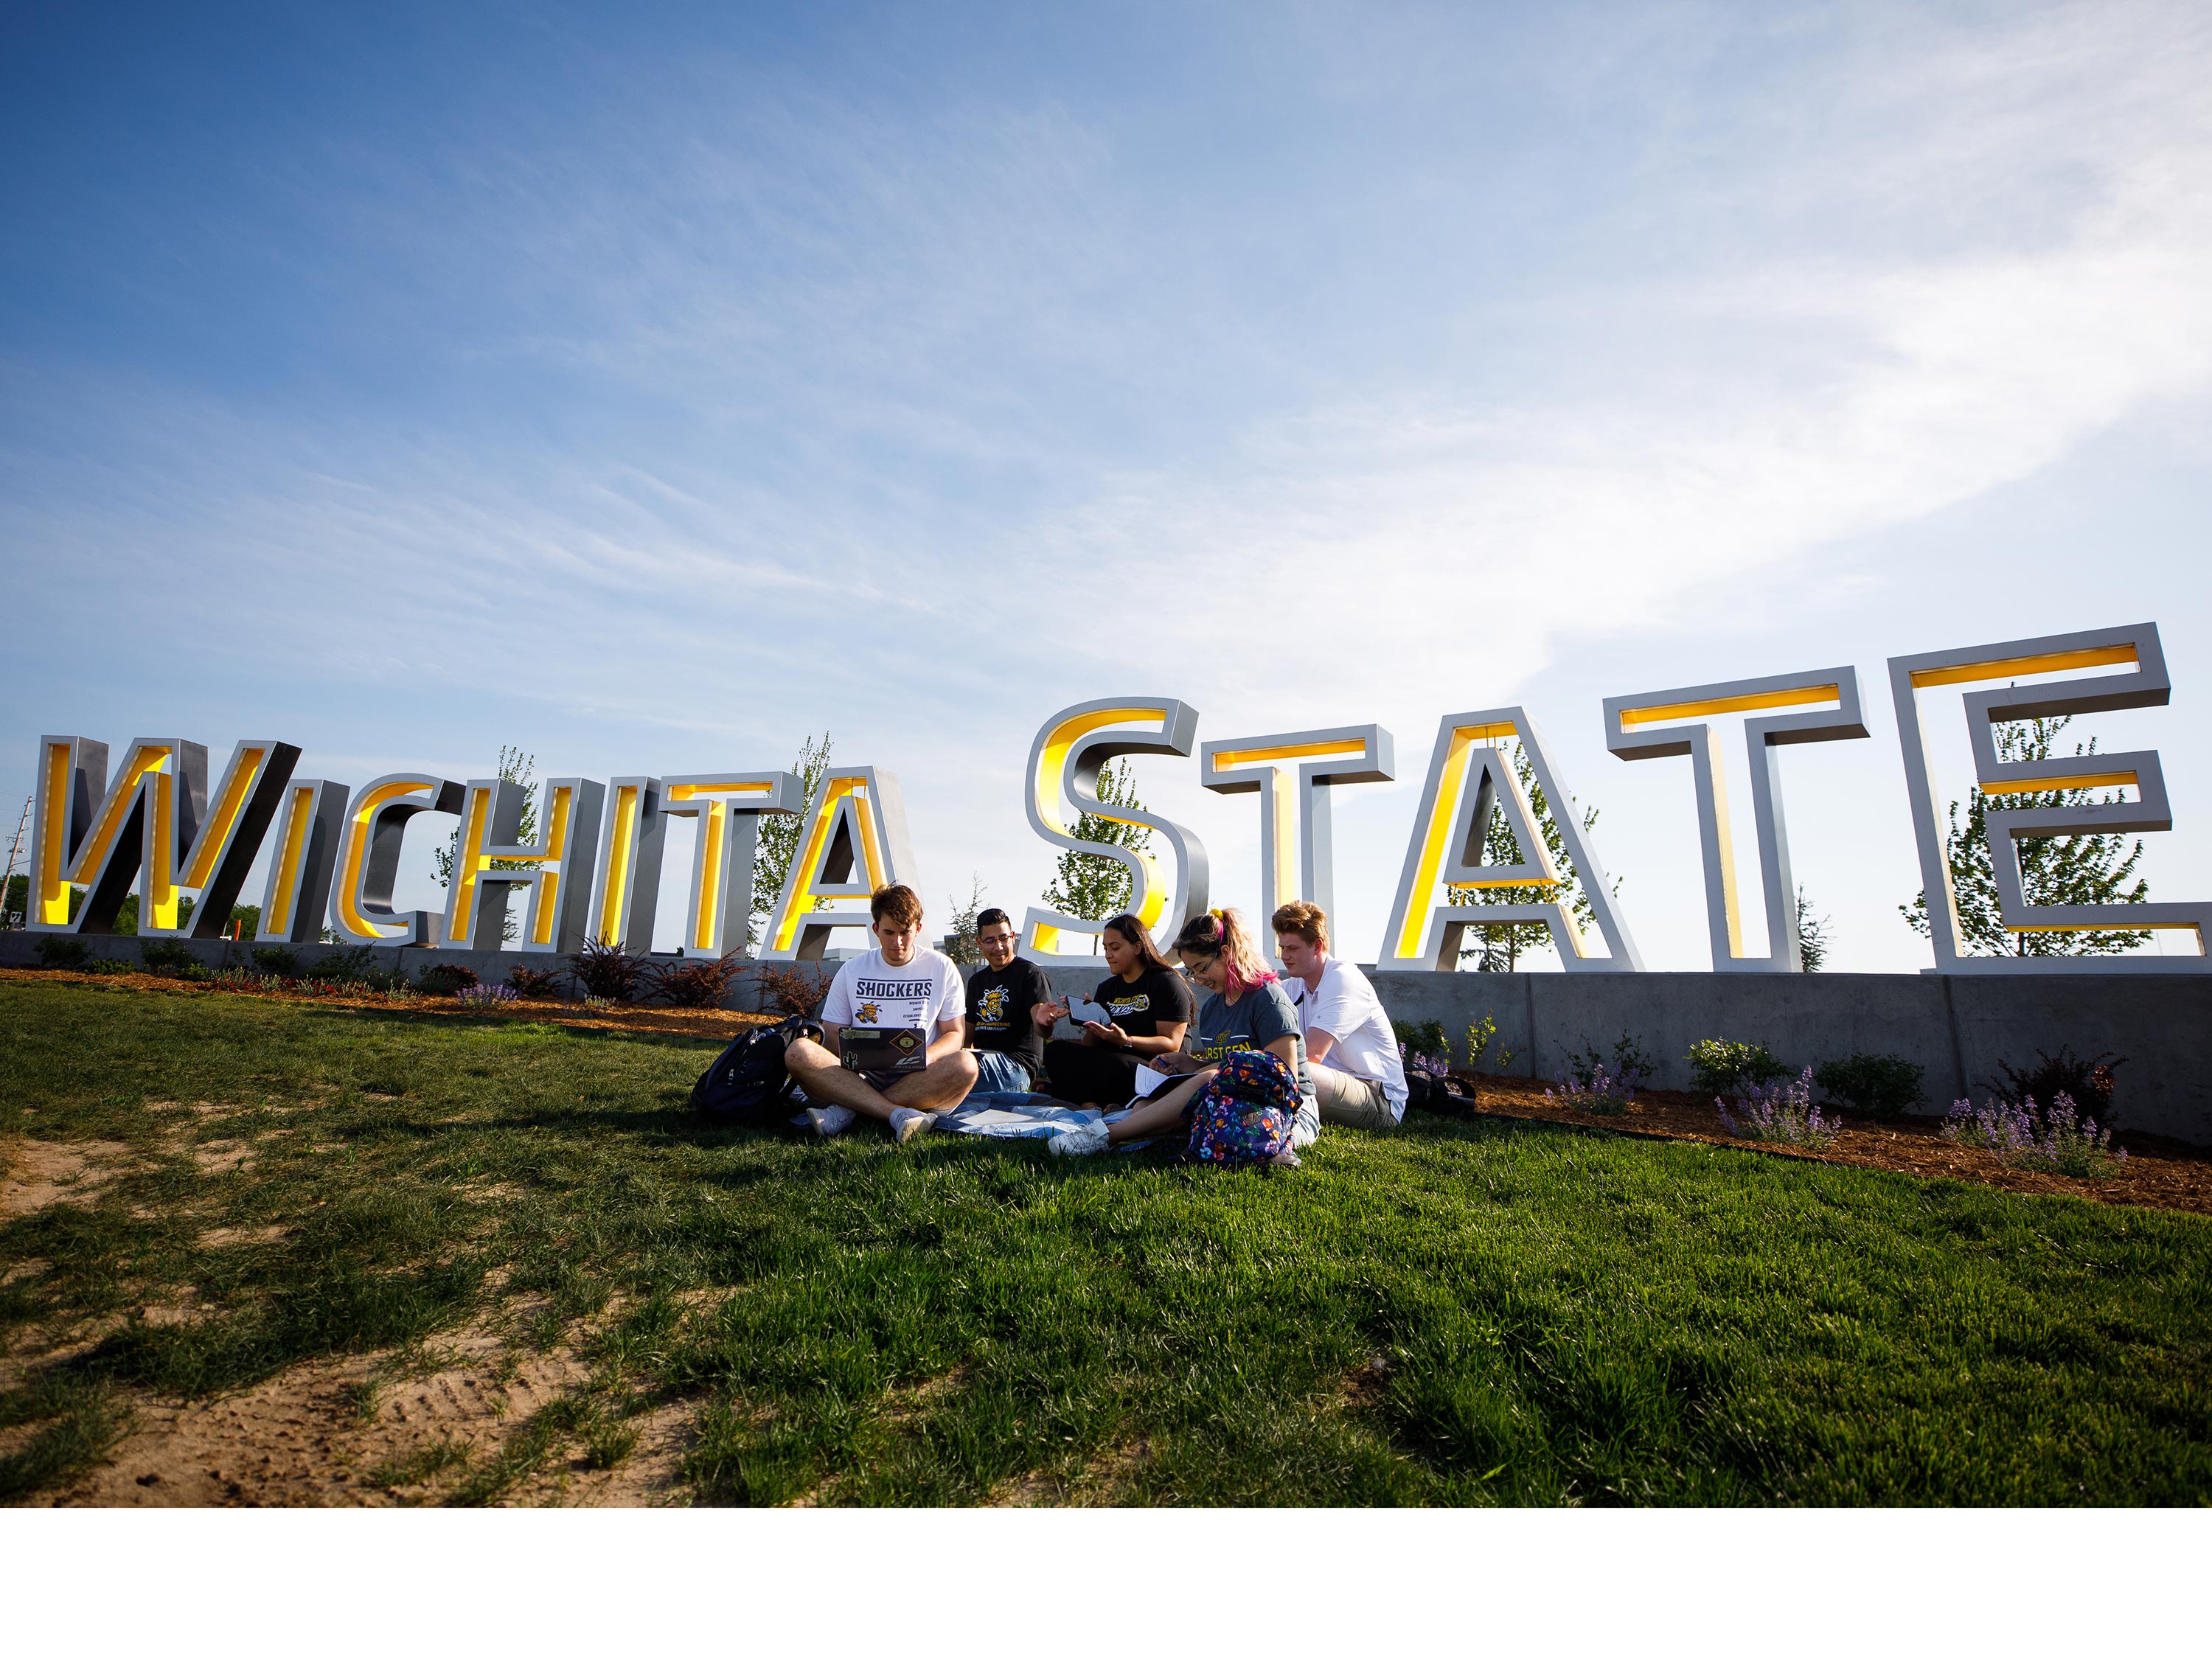 Students gather in front of the Wichita State sign at 21st and Oliver